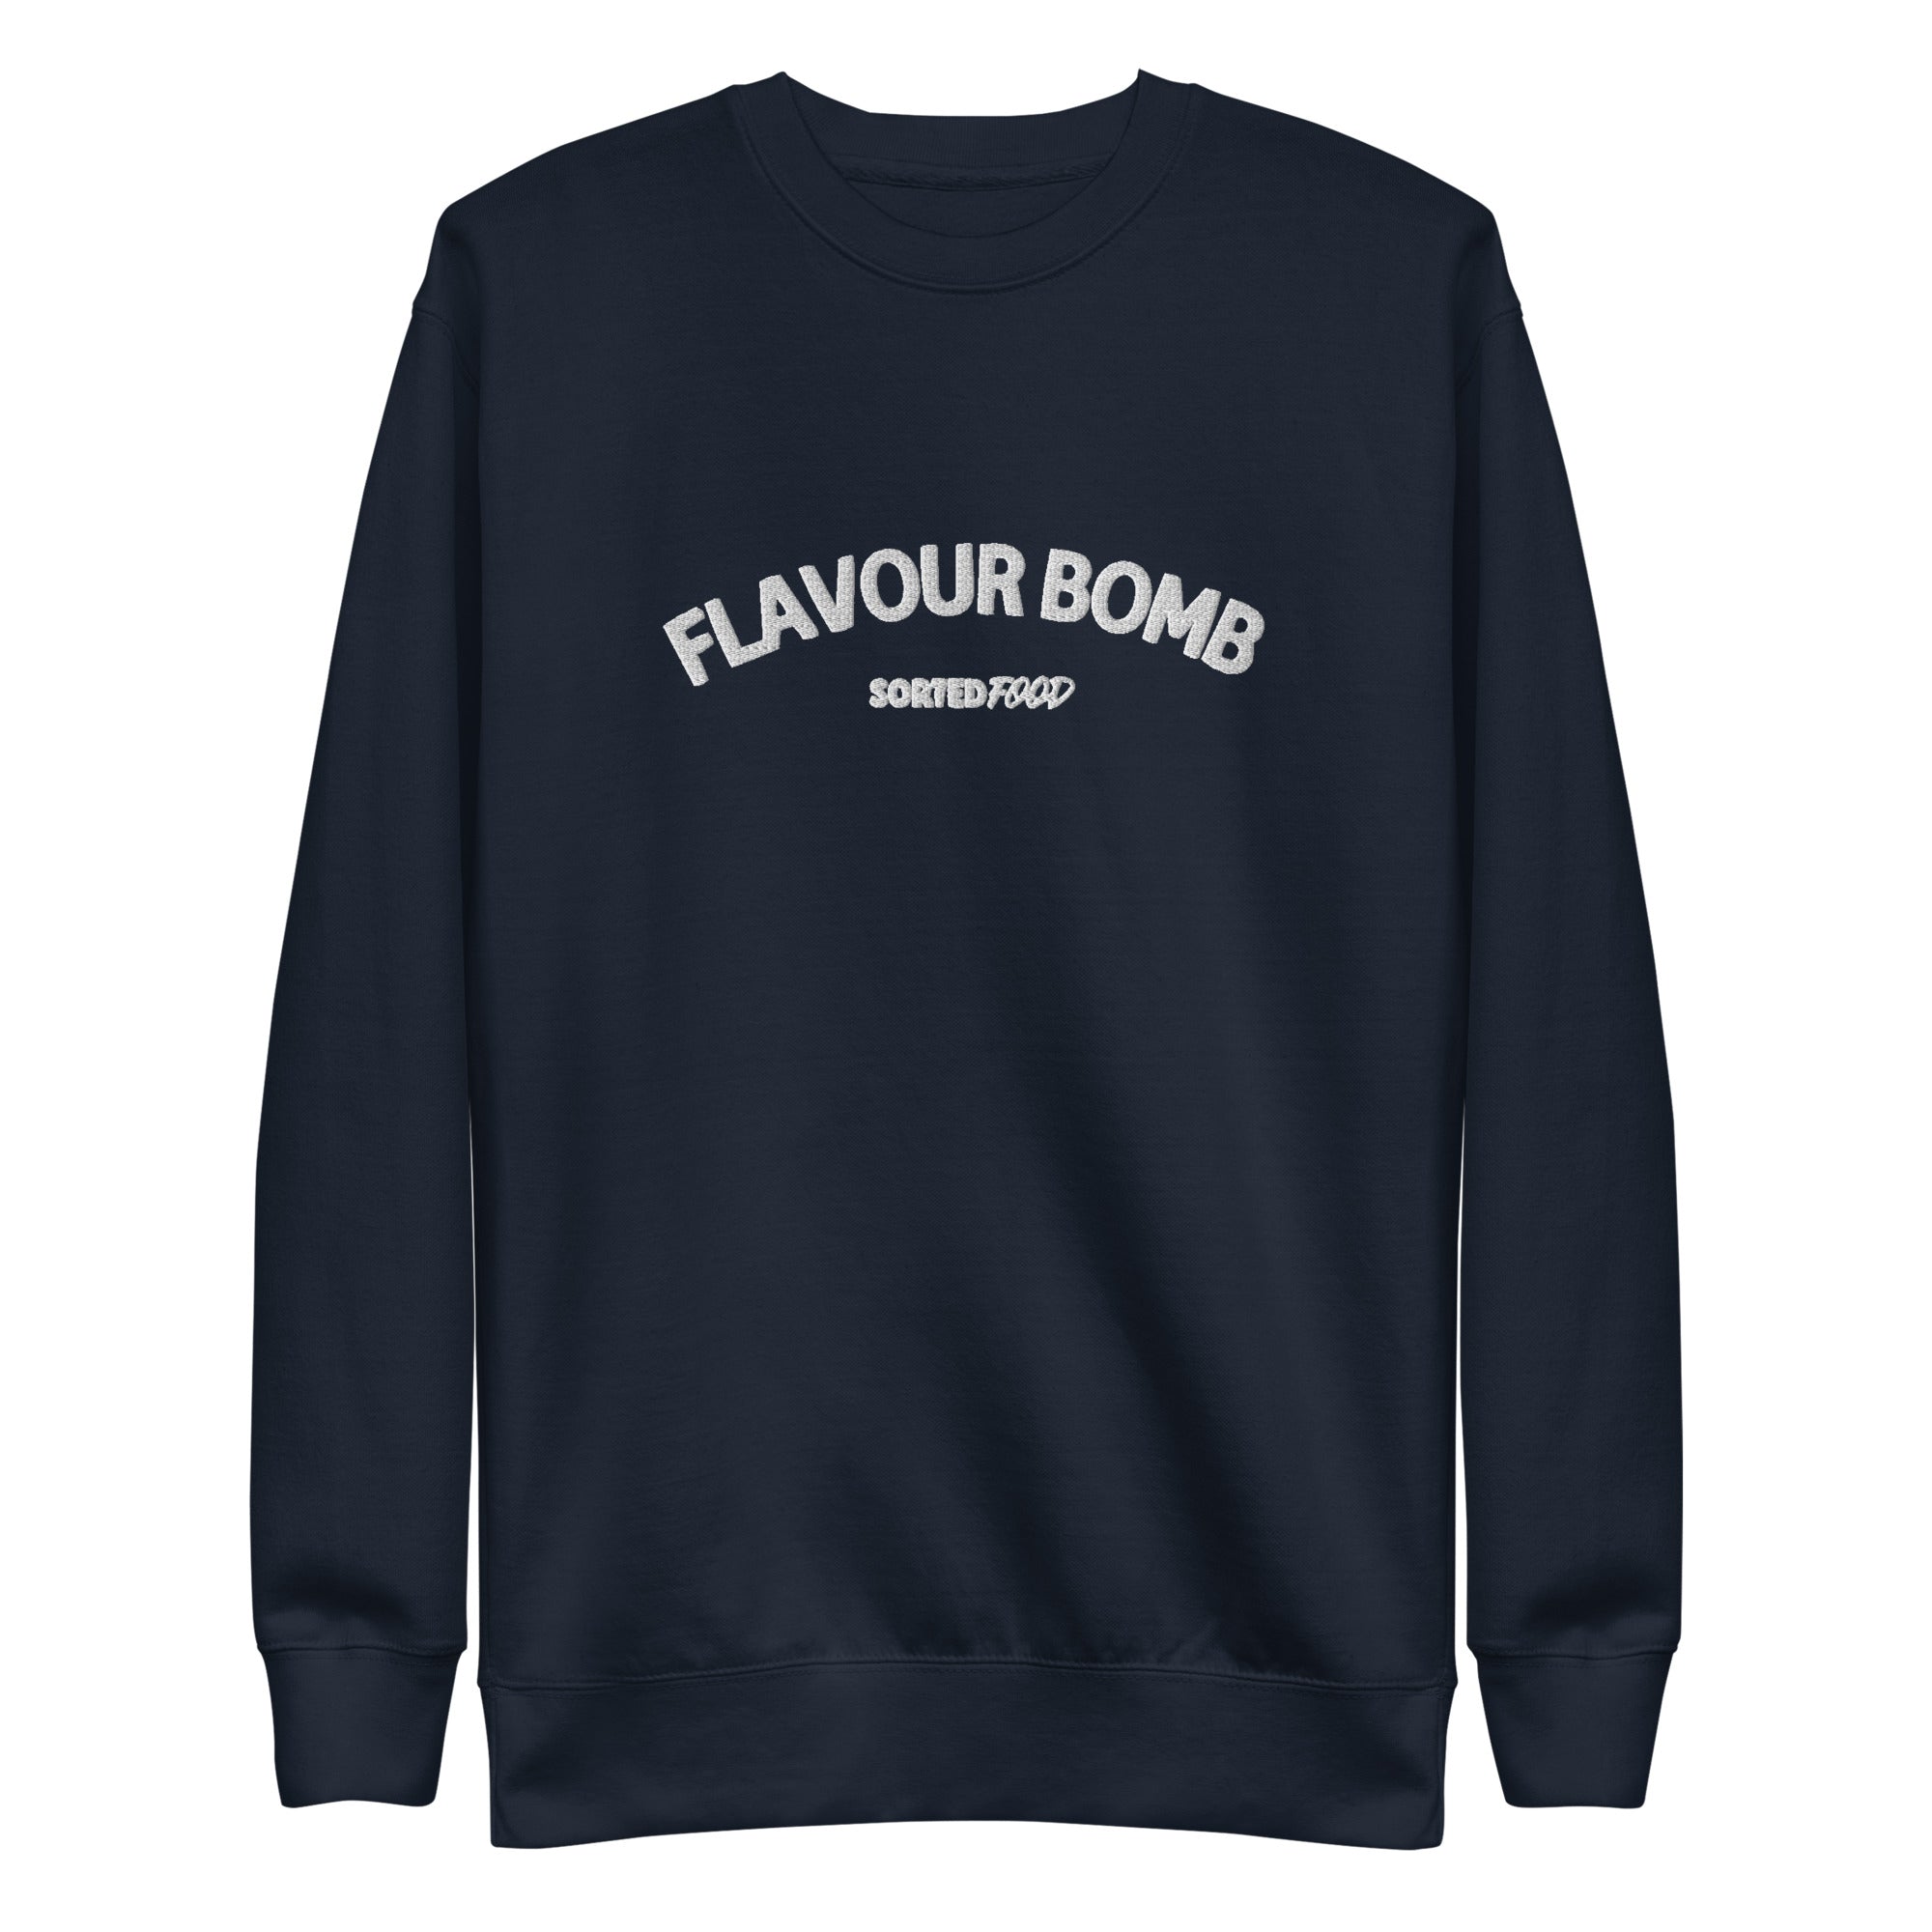 Flavour Bomb Sweat – Sorted Food